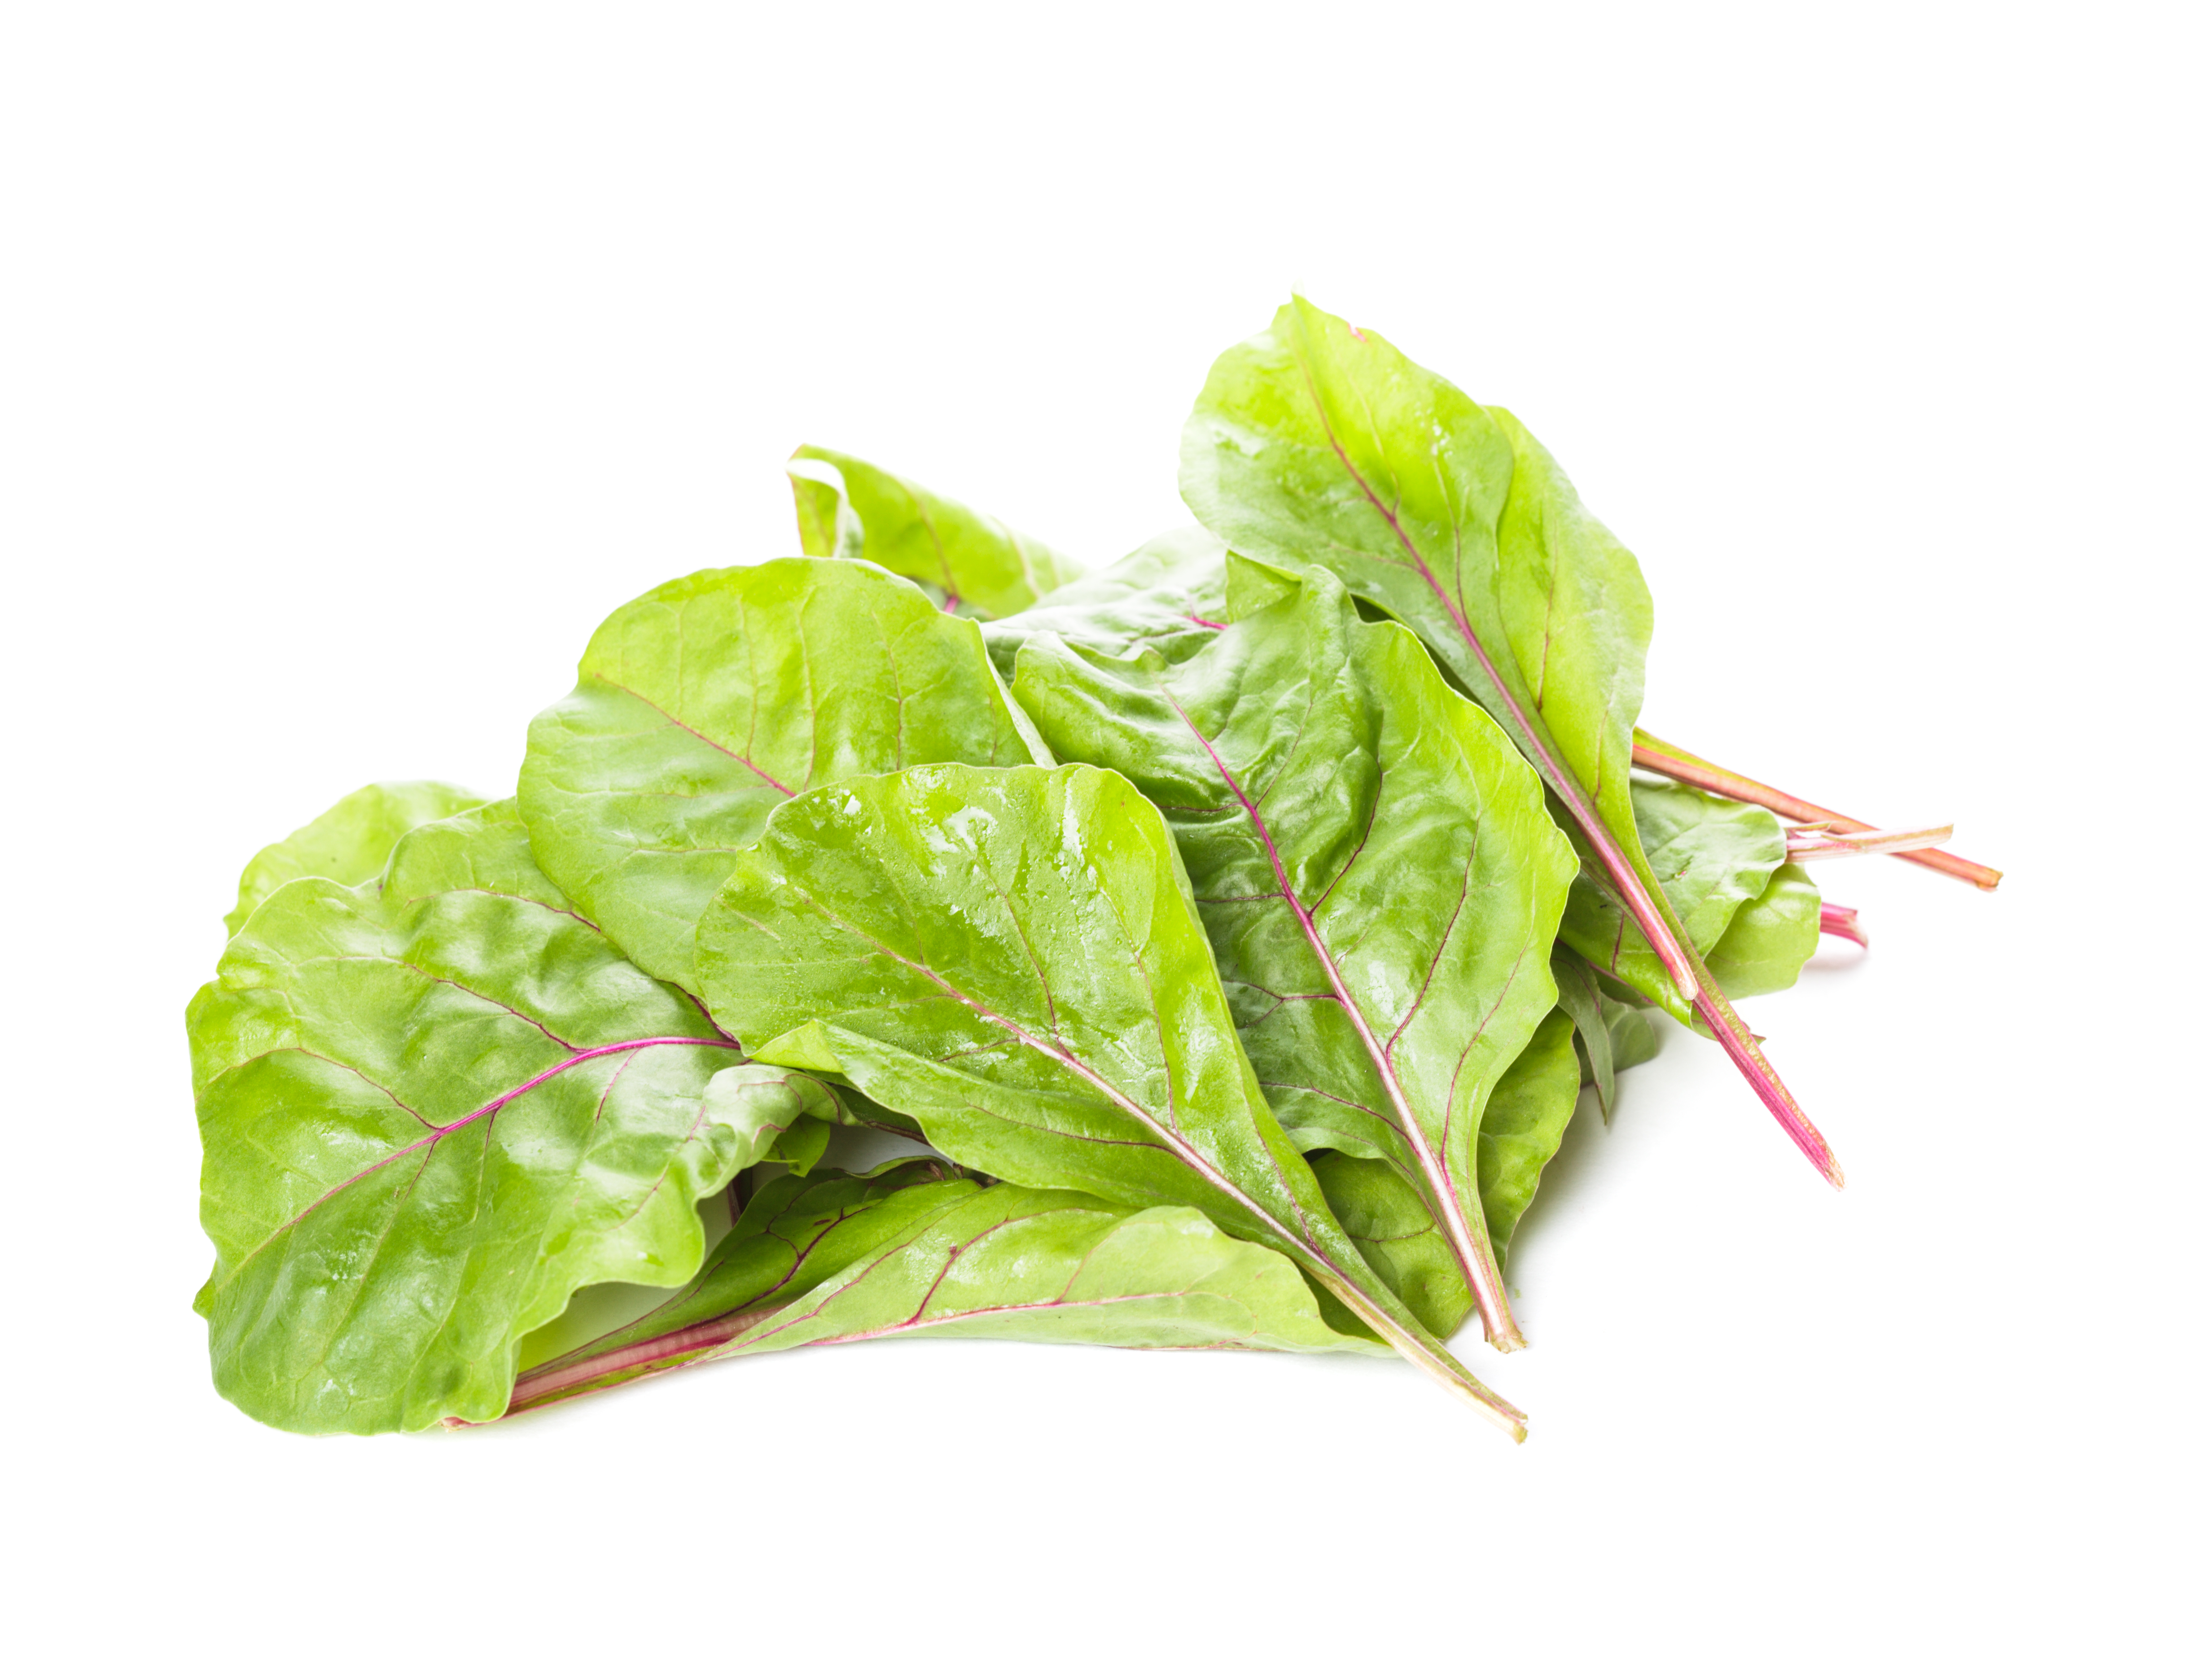 Chard leaves on a white background